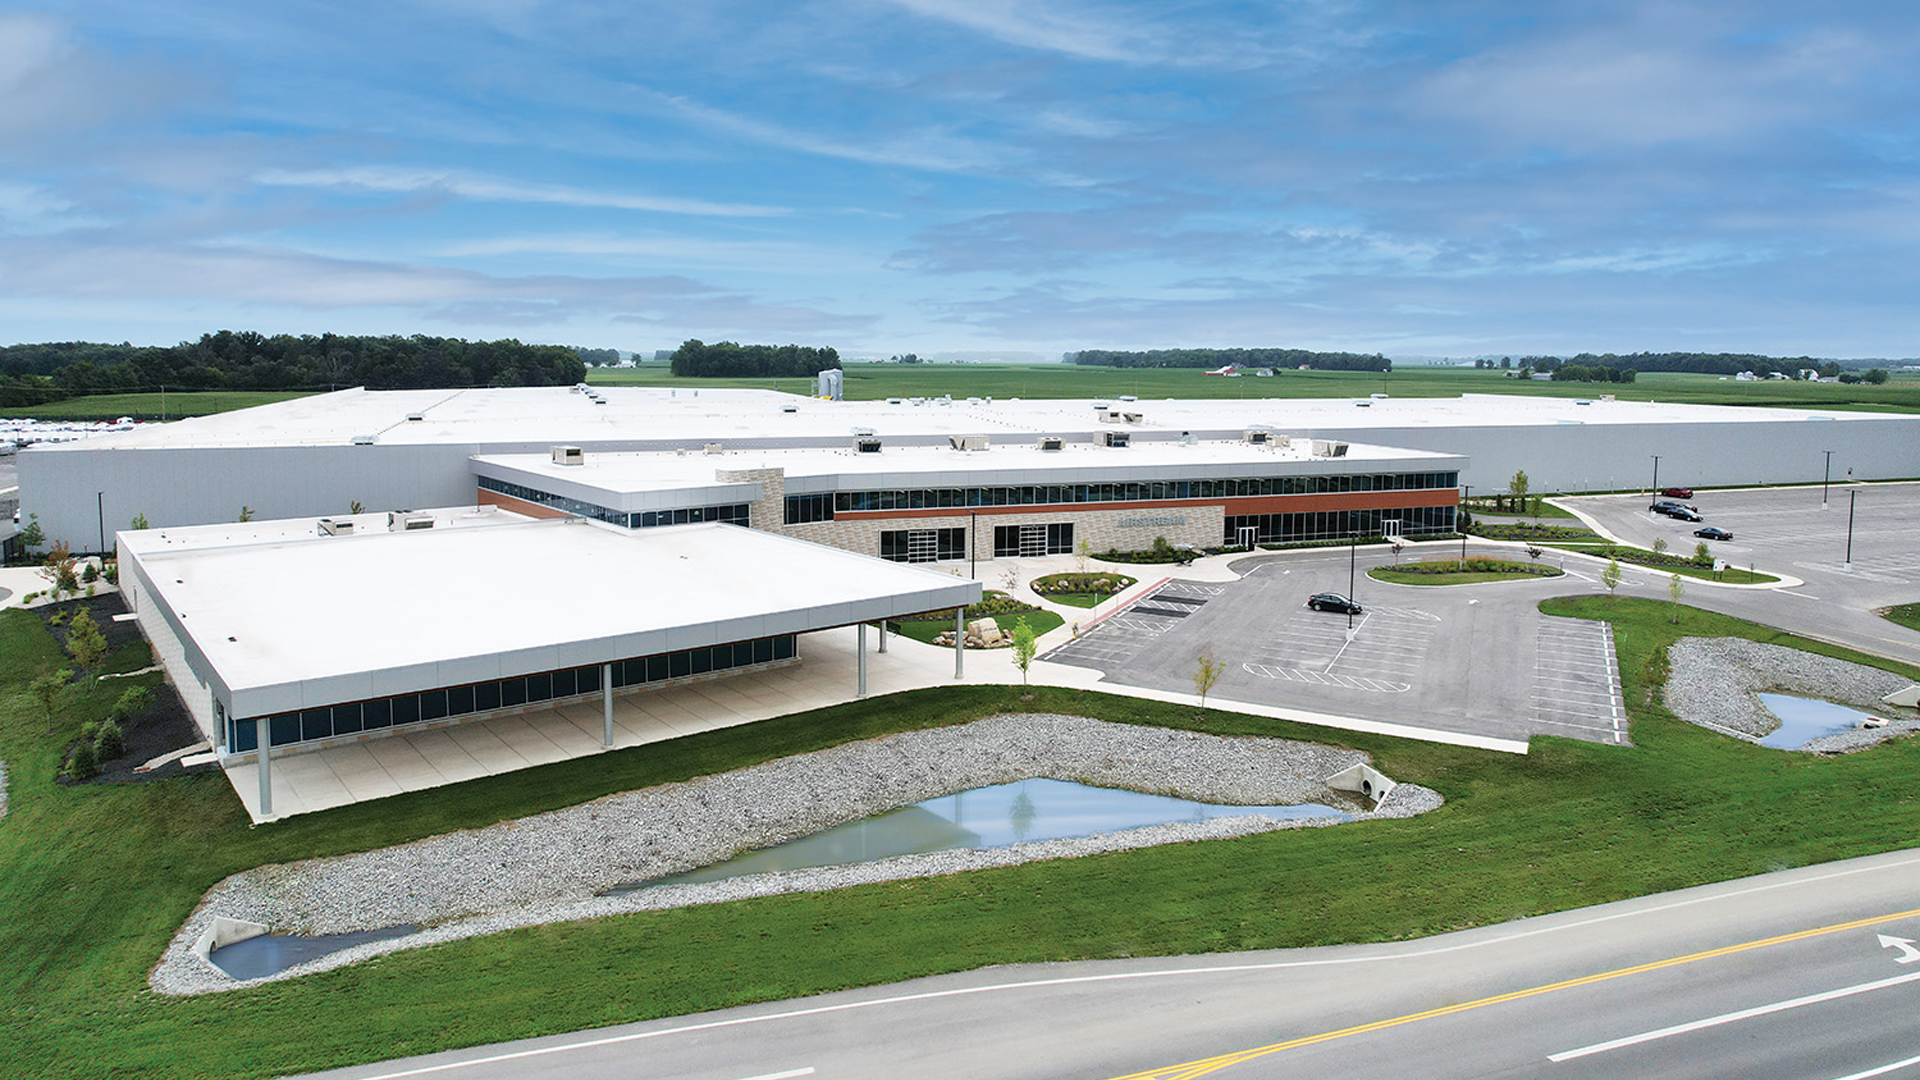 The newly built Airstream travel trailer plant in Jackson Center, Ohio.